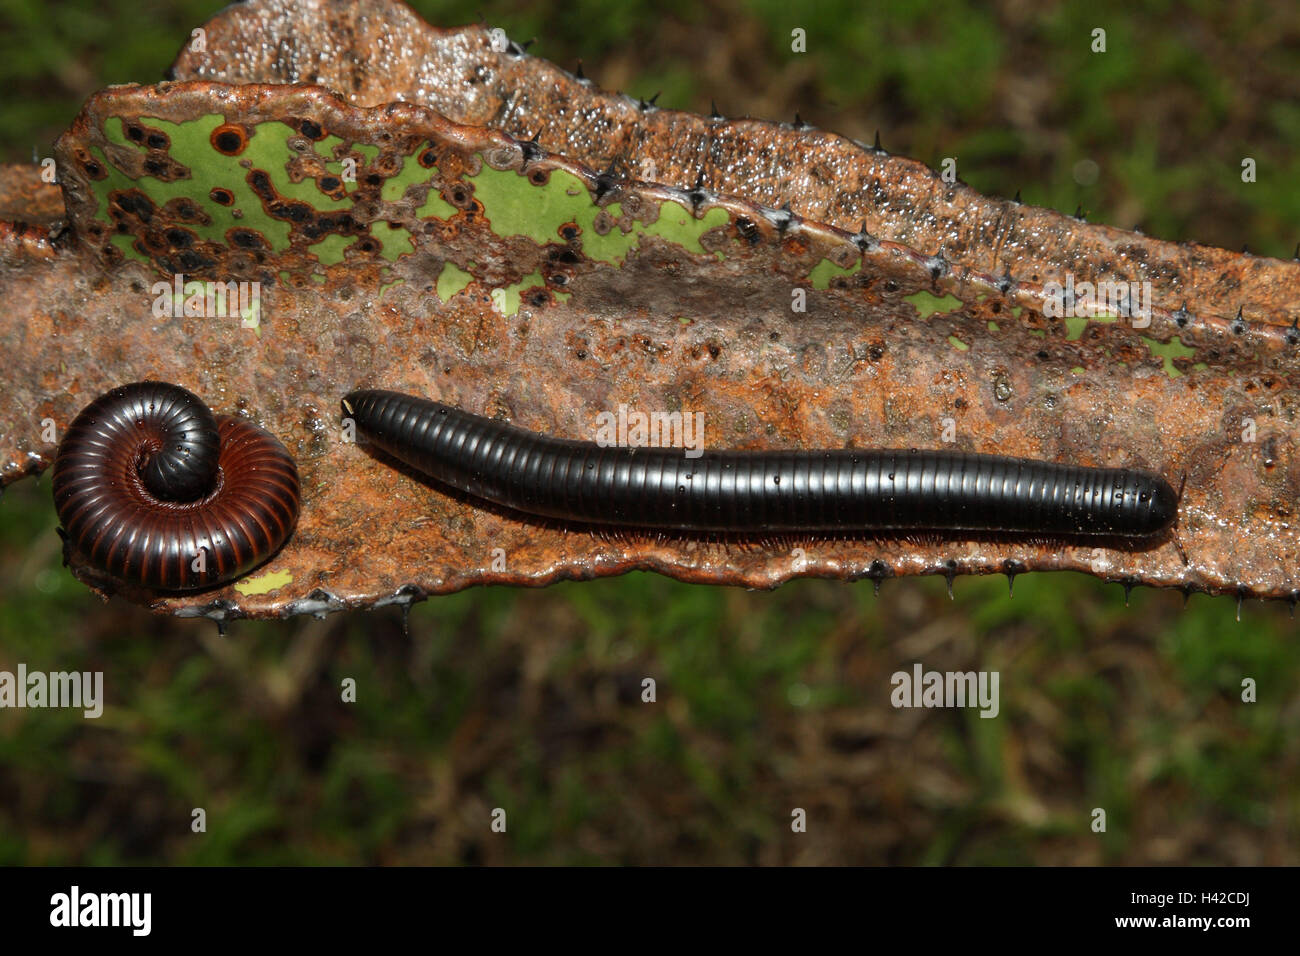 African centipede, Thousend-legged Worms, Stock Photo